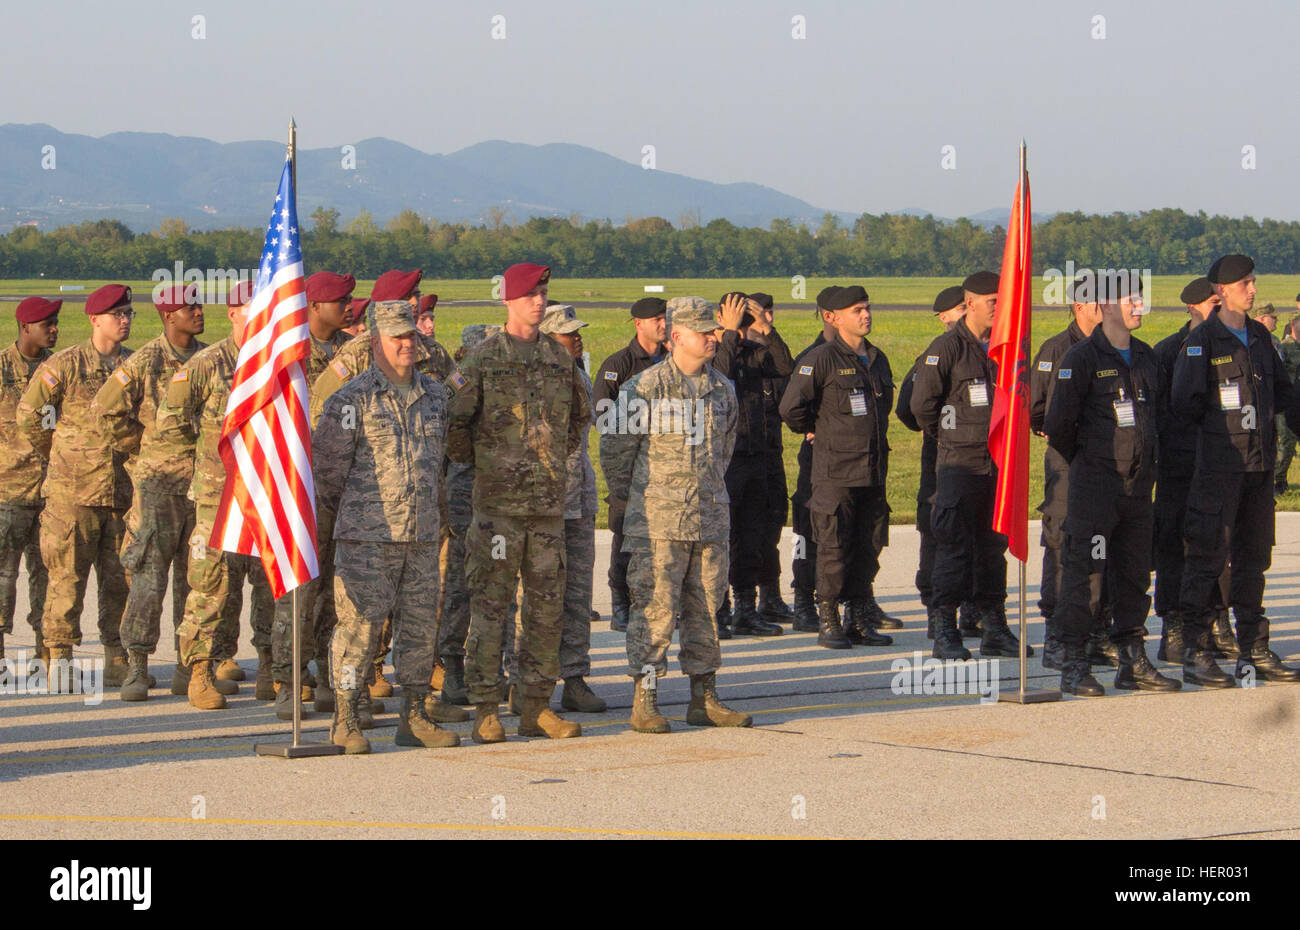 Soldiers and Airmen from the United States stand in formation with multinational partners at the Immediate Response 16 opening ceremony. Immediate Response 16 is a multinational, brigade-level command post exercise utilizing computer-assisted simulations and field training exercises spanning two countries, Croatia and Slovenia. The exercises and simulations are built upon a decisive action based scenario and are designed to enhance regional stability, strengthen Allied and partner nation capacity, and improve interoperability among partner nations. The exercise will occur Sept. 9-23, 2016, and Stock Photo